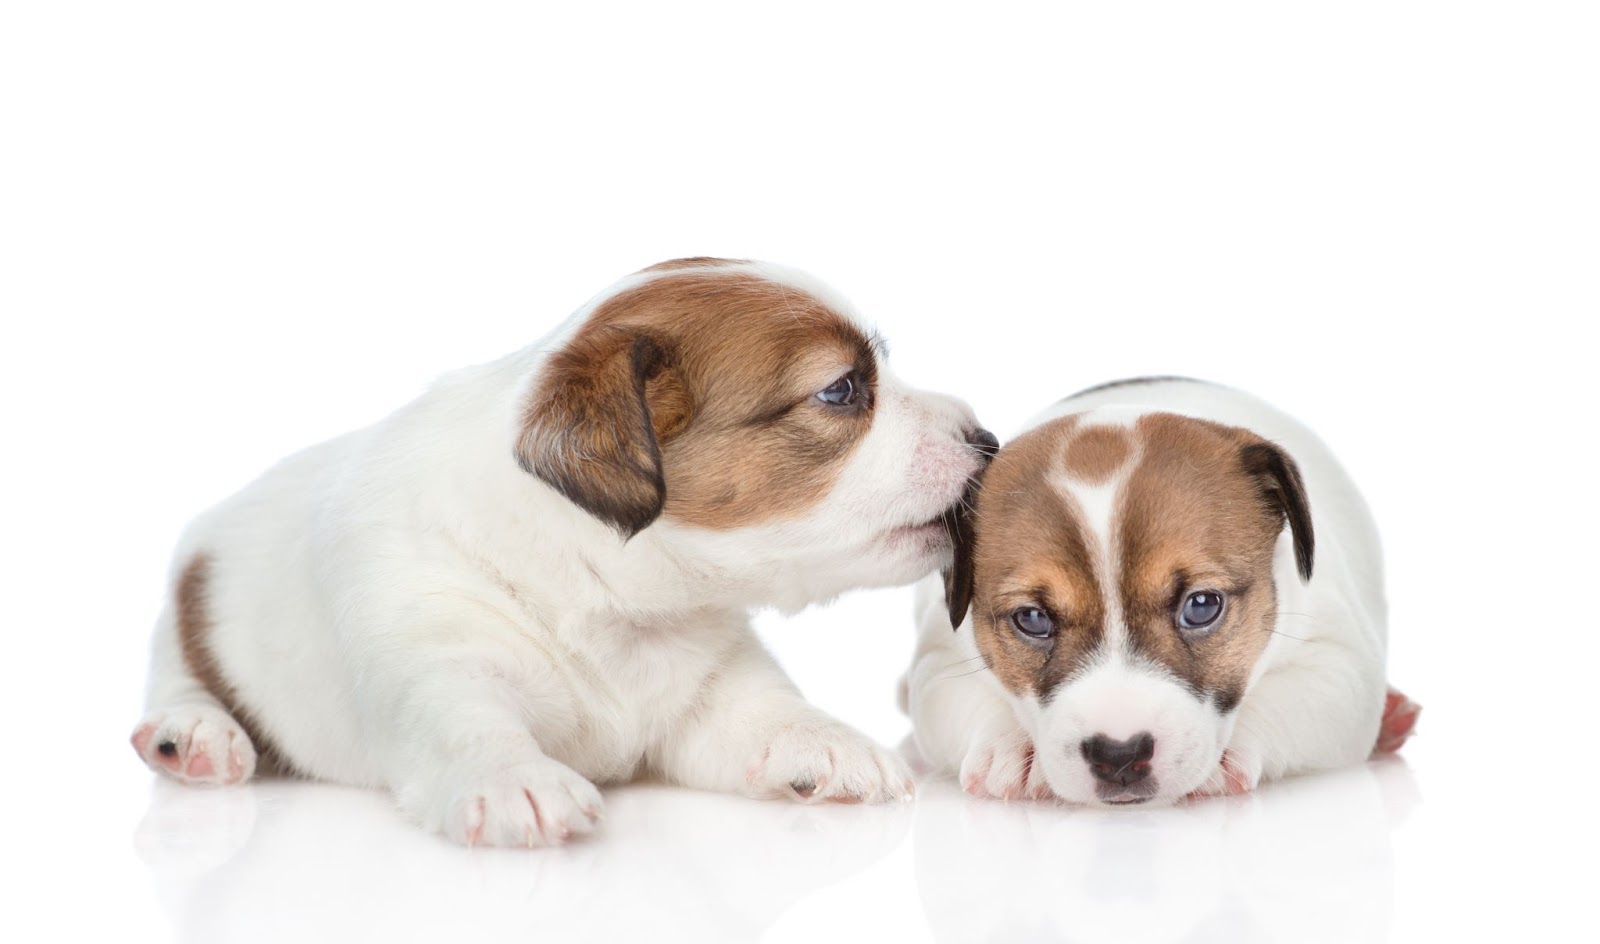 Why does your dog lick other dog's ears?